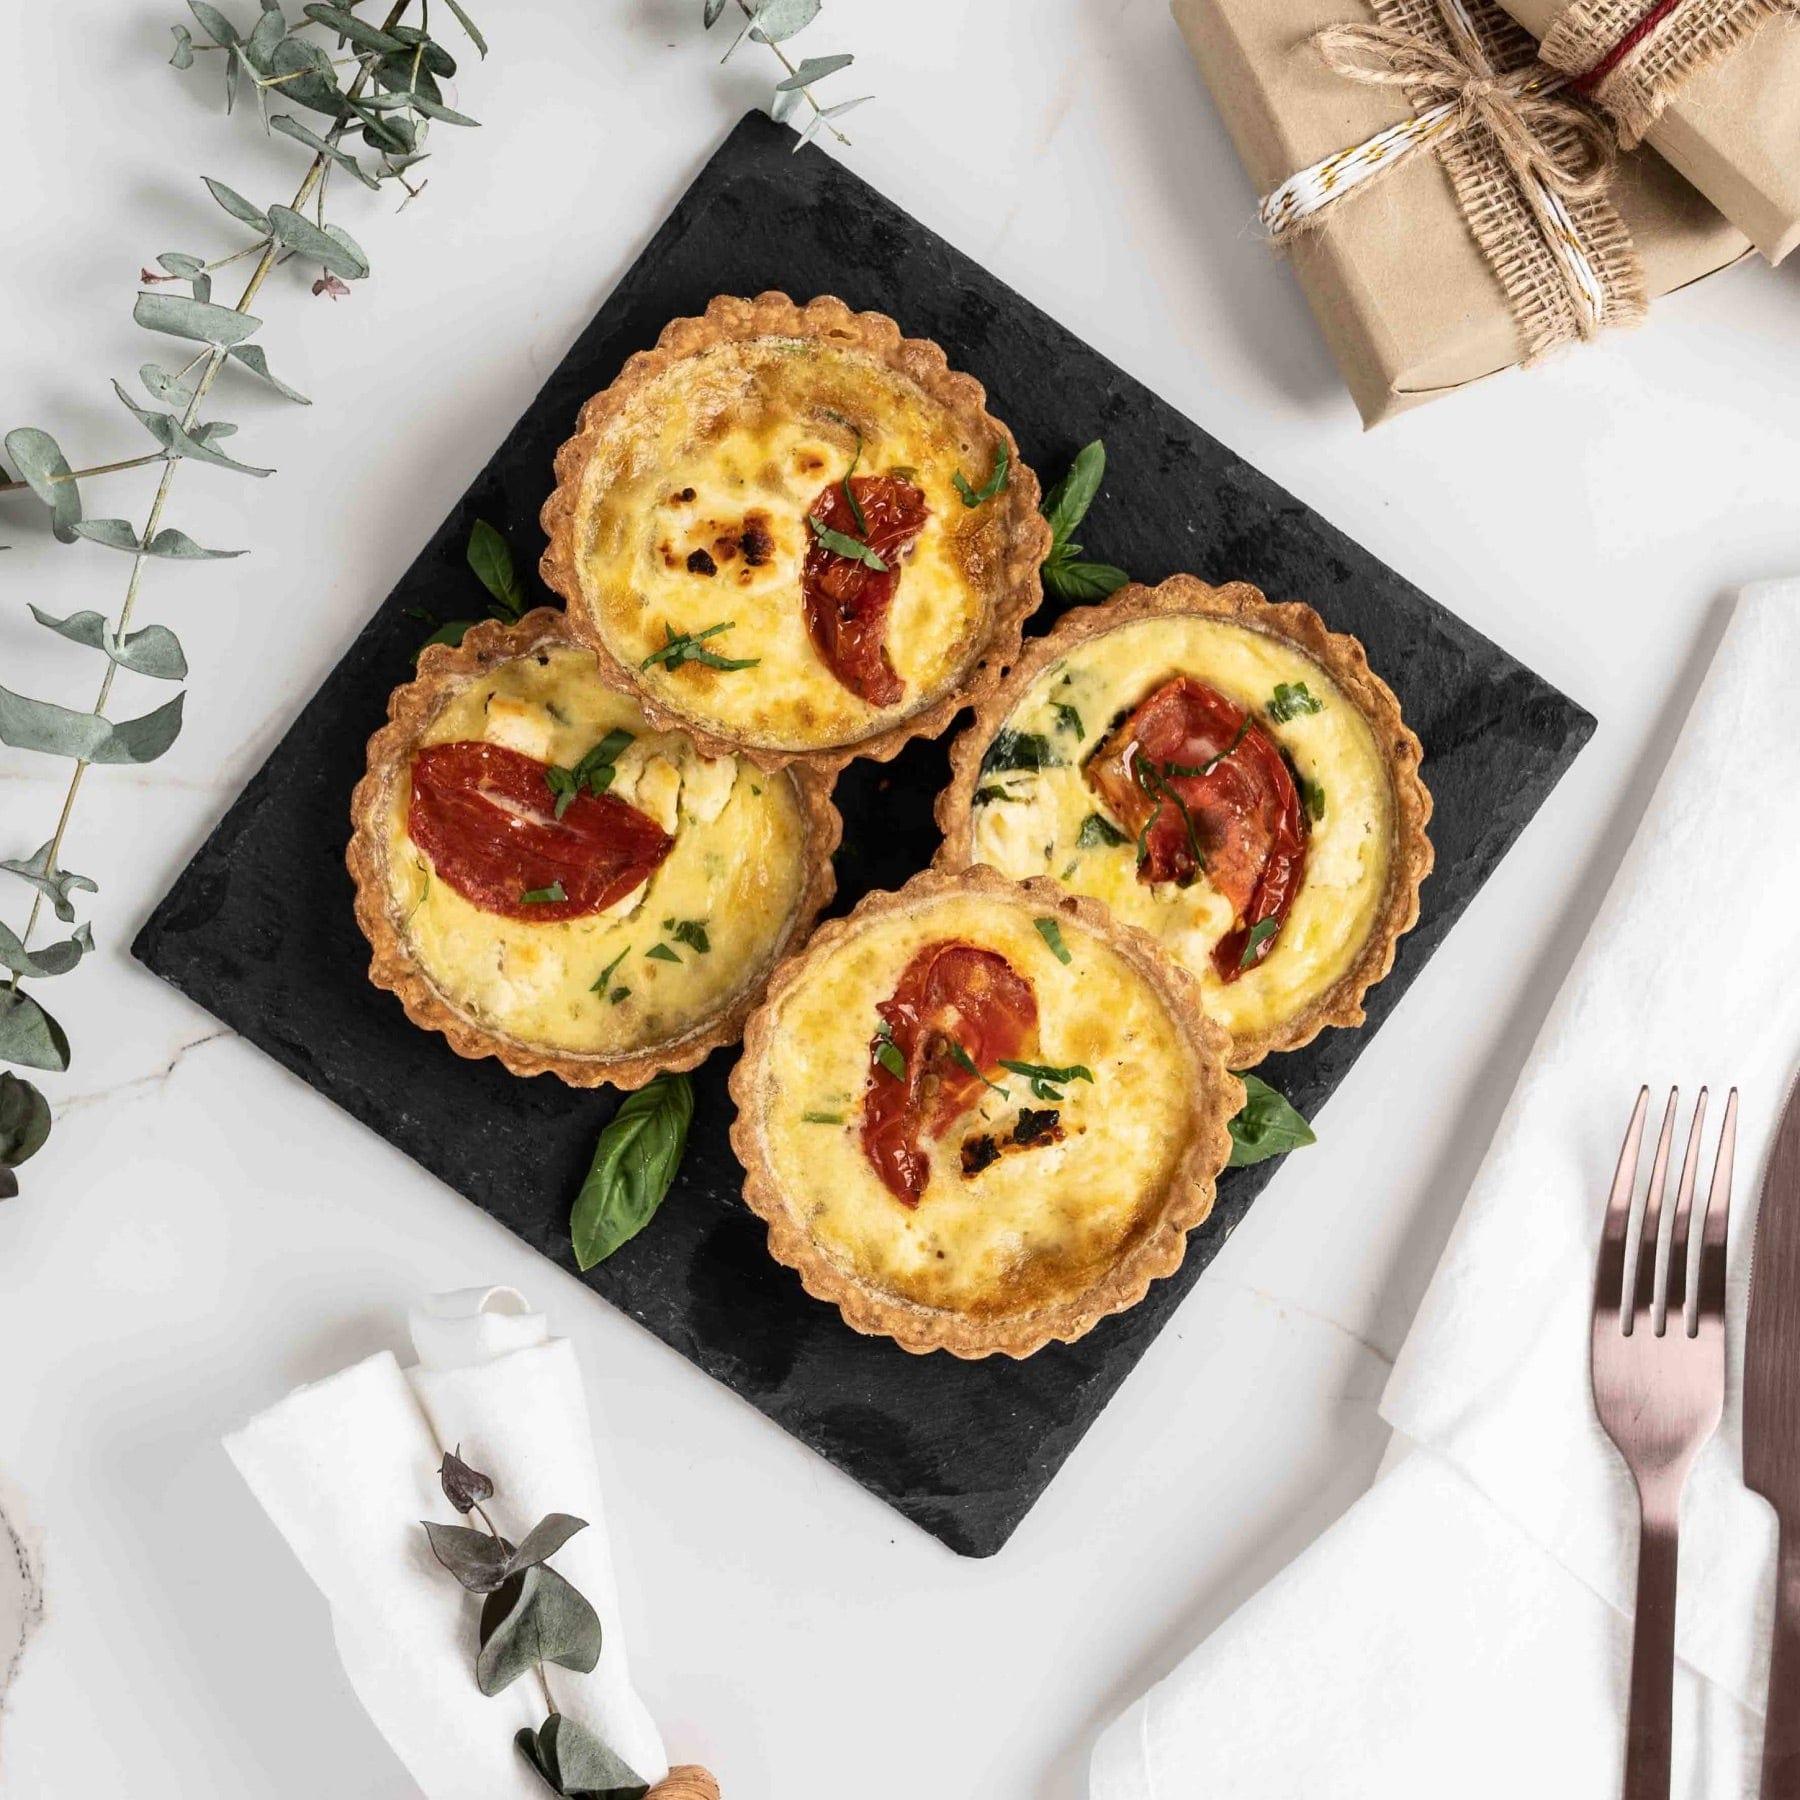 Handmade Goat Cheese and Roasted Tomatoes Tarts